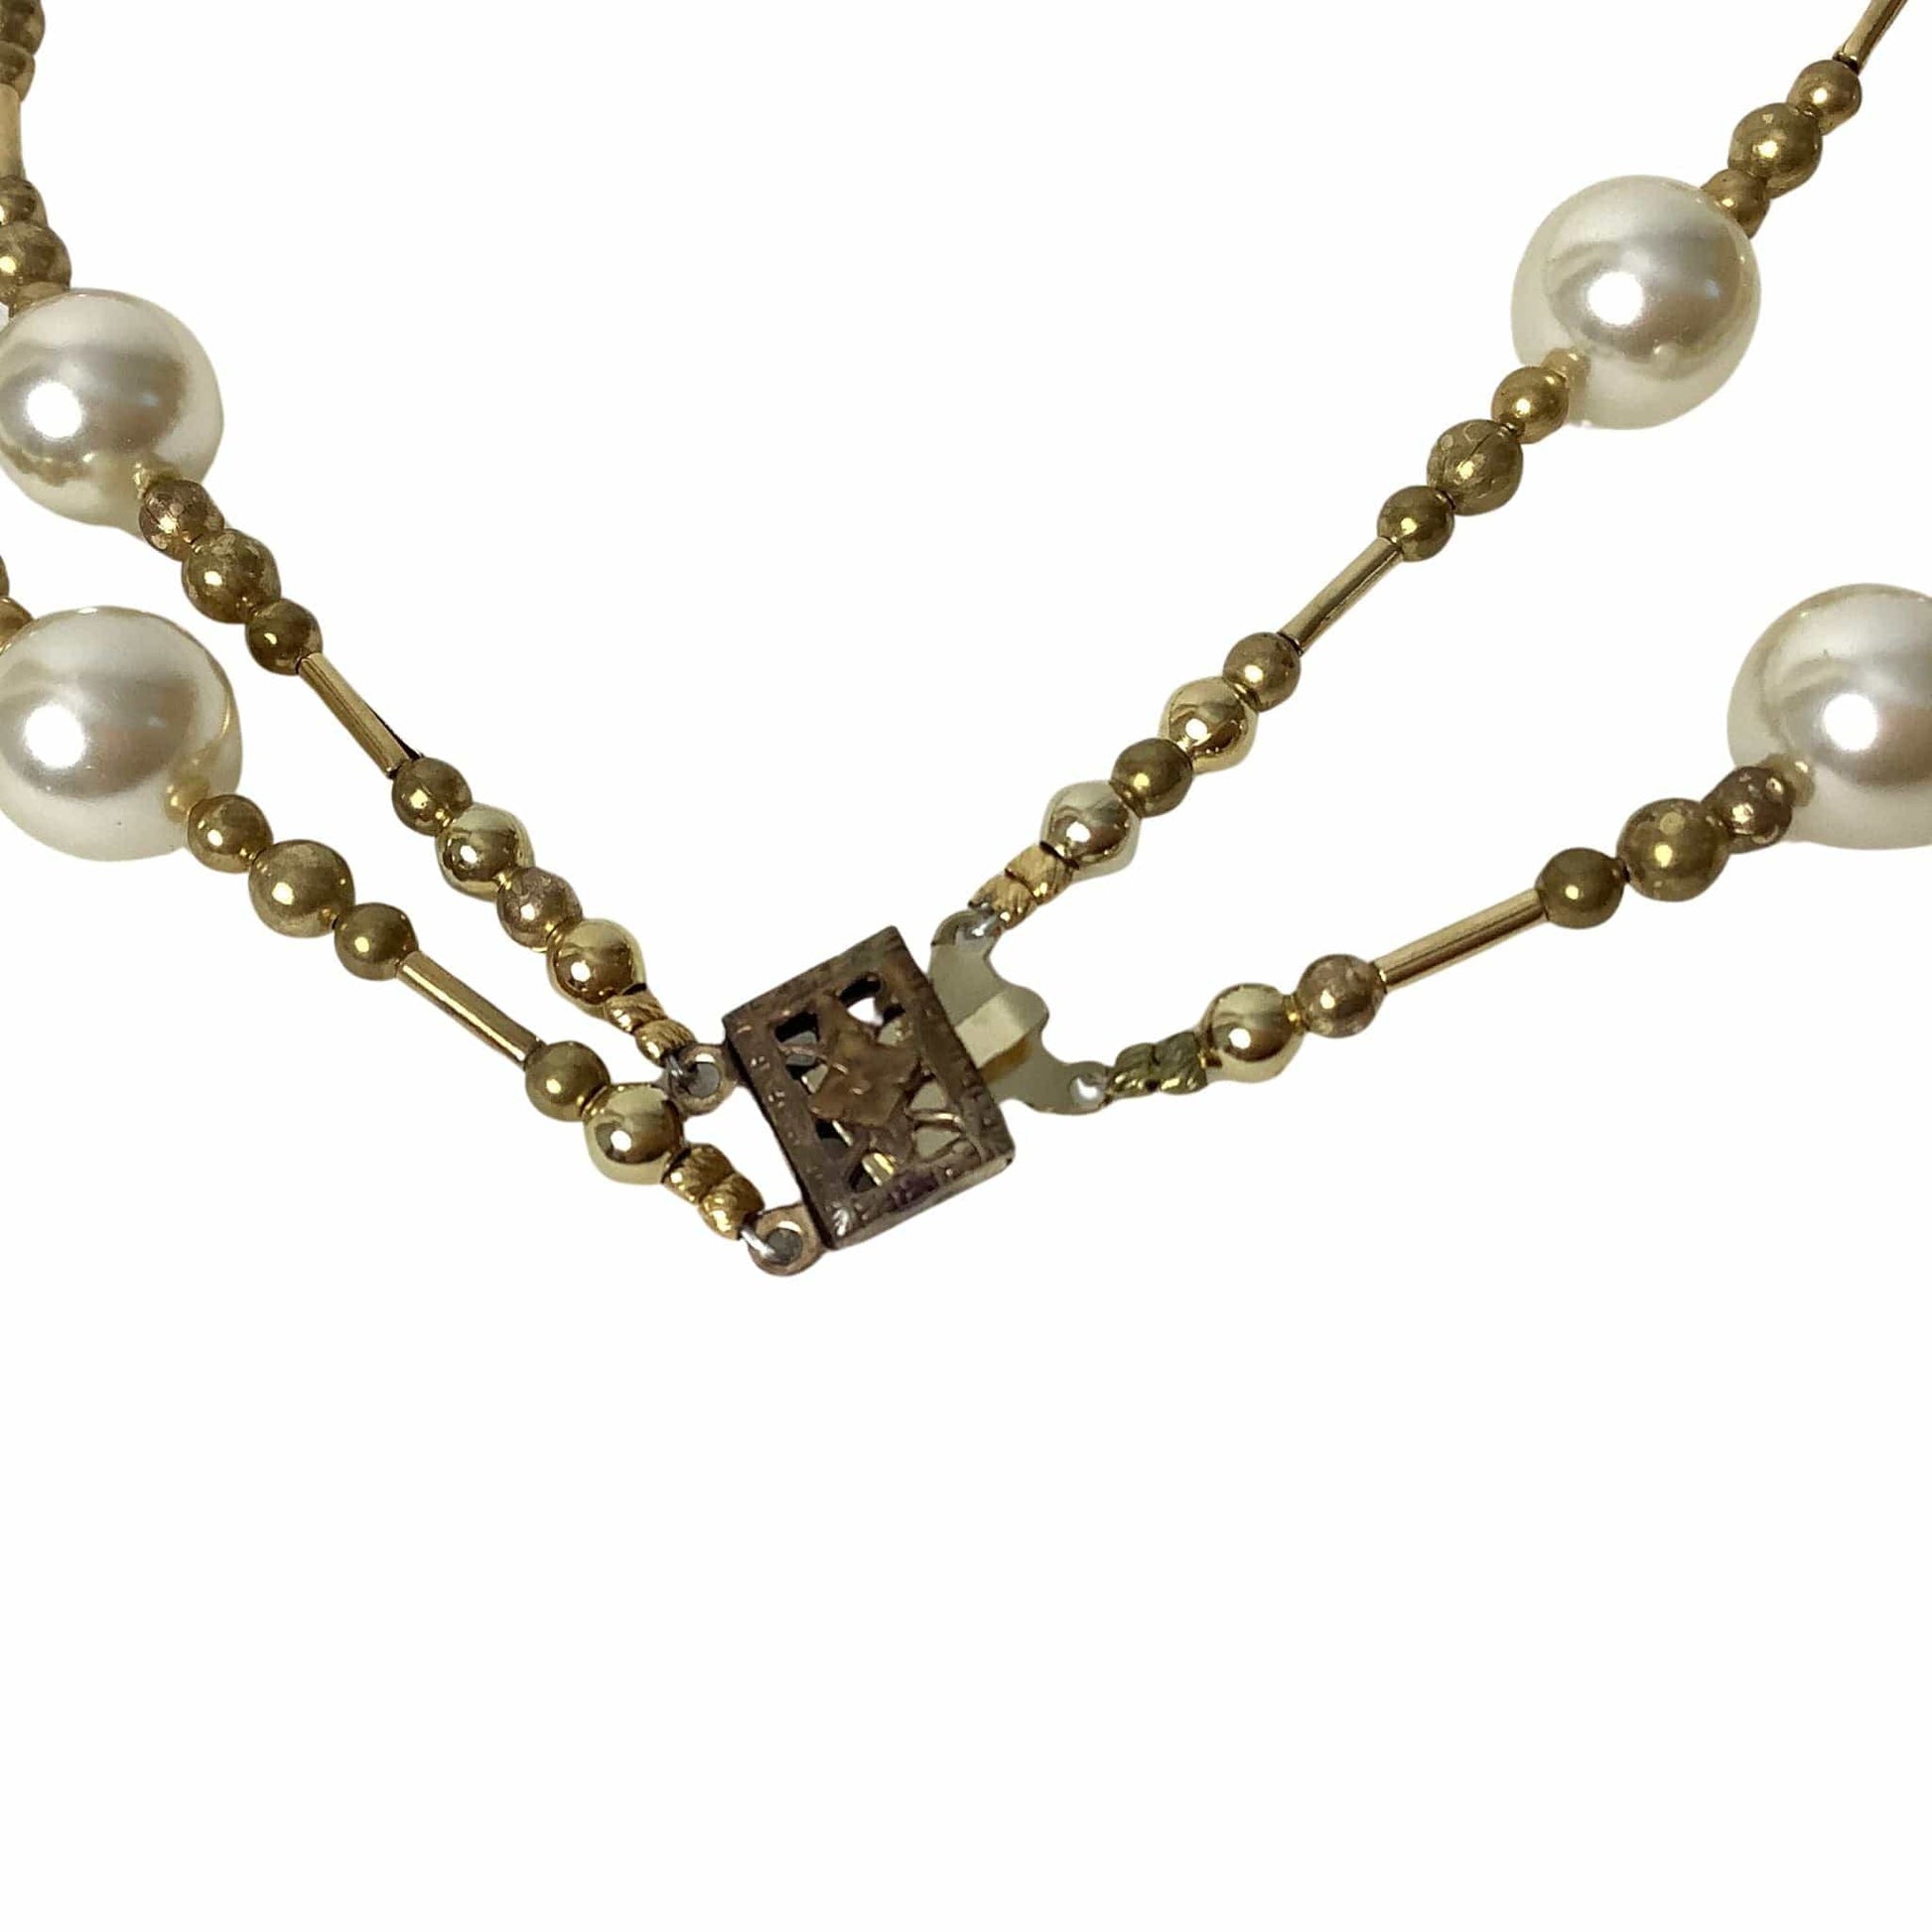 Two Strand Pearl Necklace Beige / Man made / Vintage 1950s